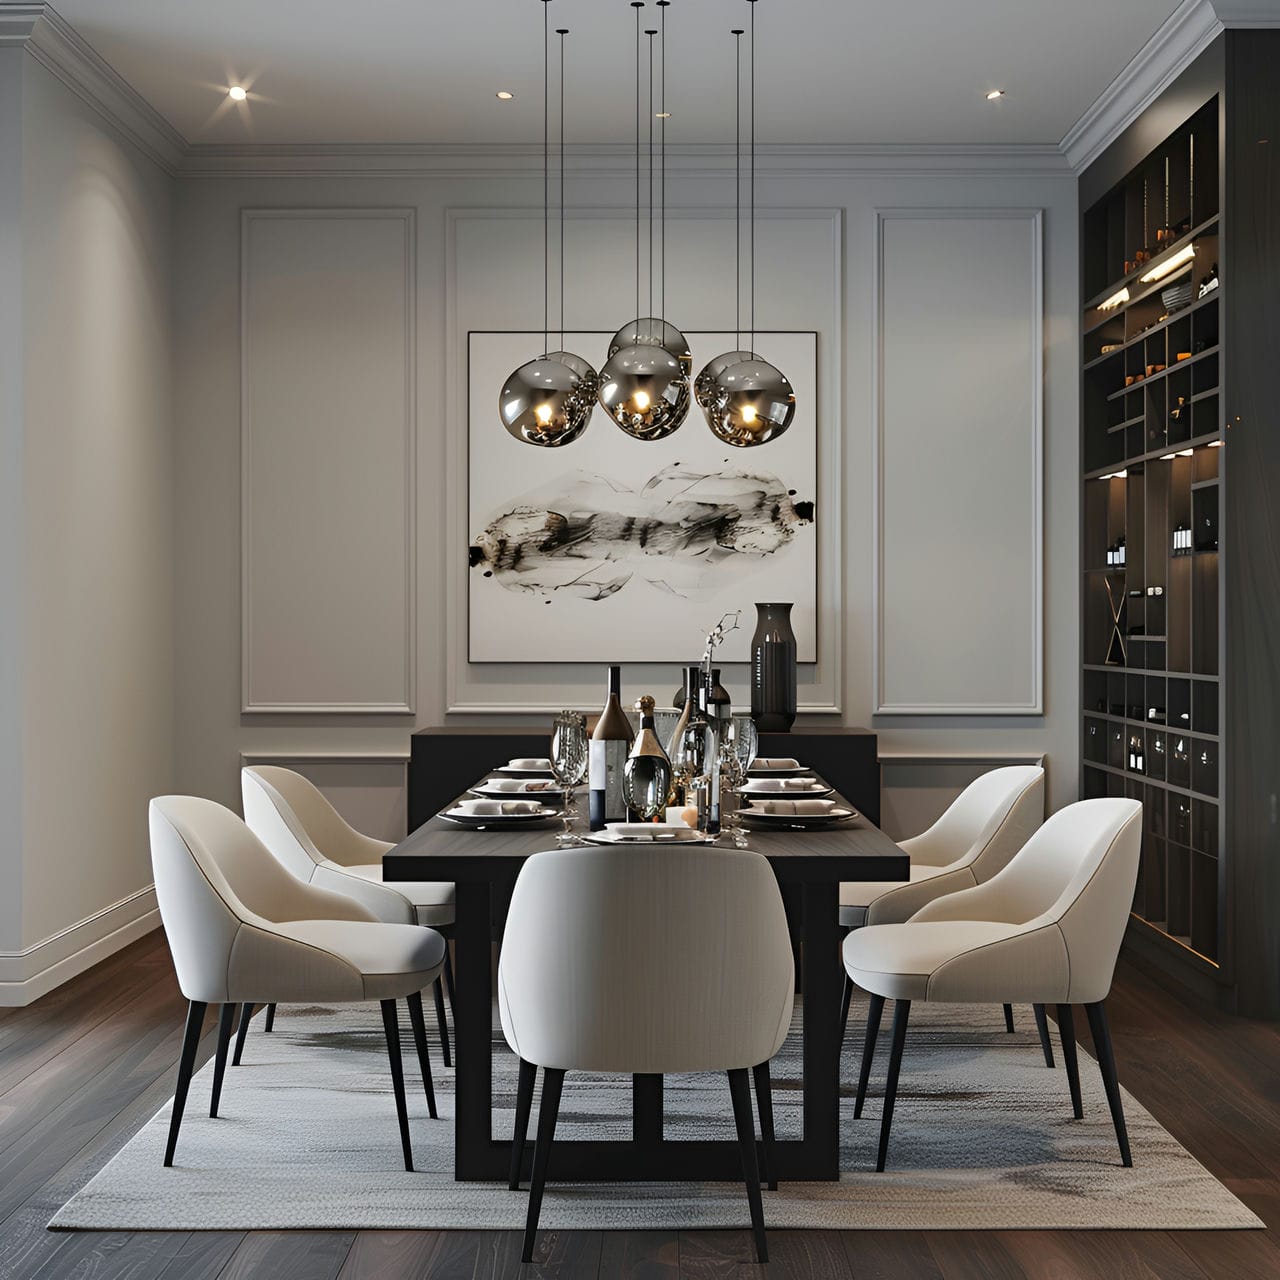 Dining room: size, functionality, uses, furniture and renovation